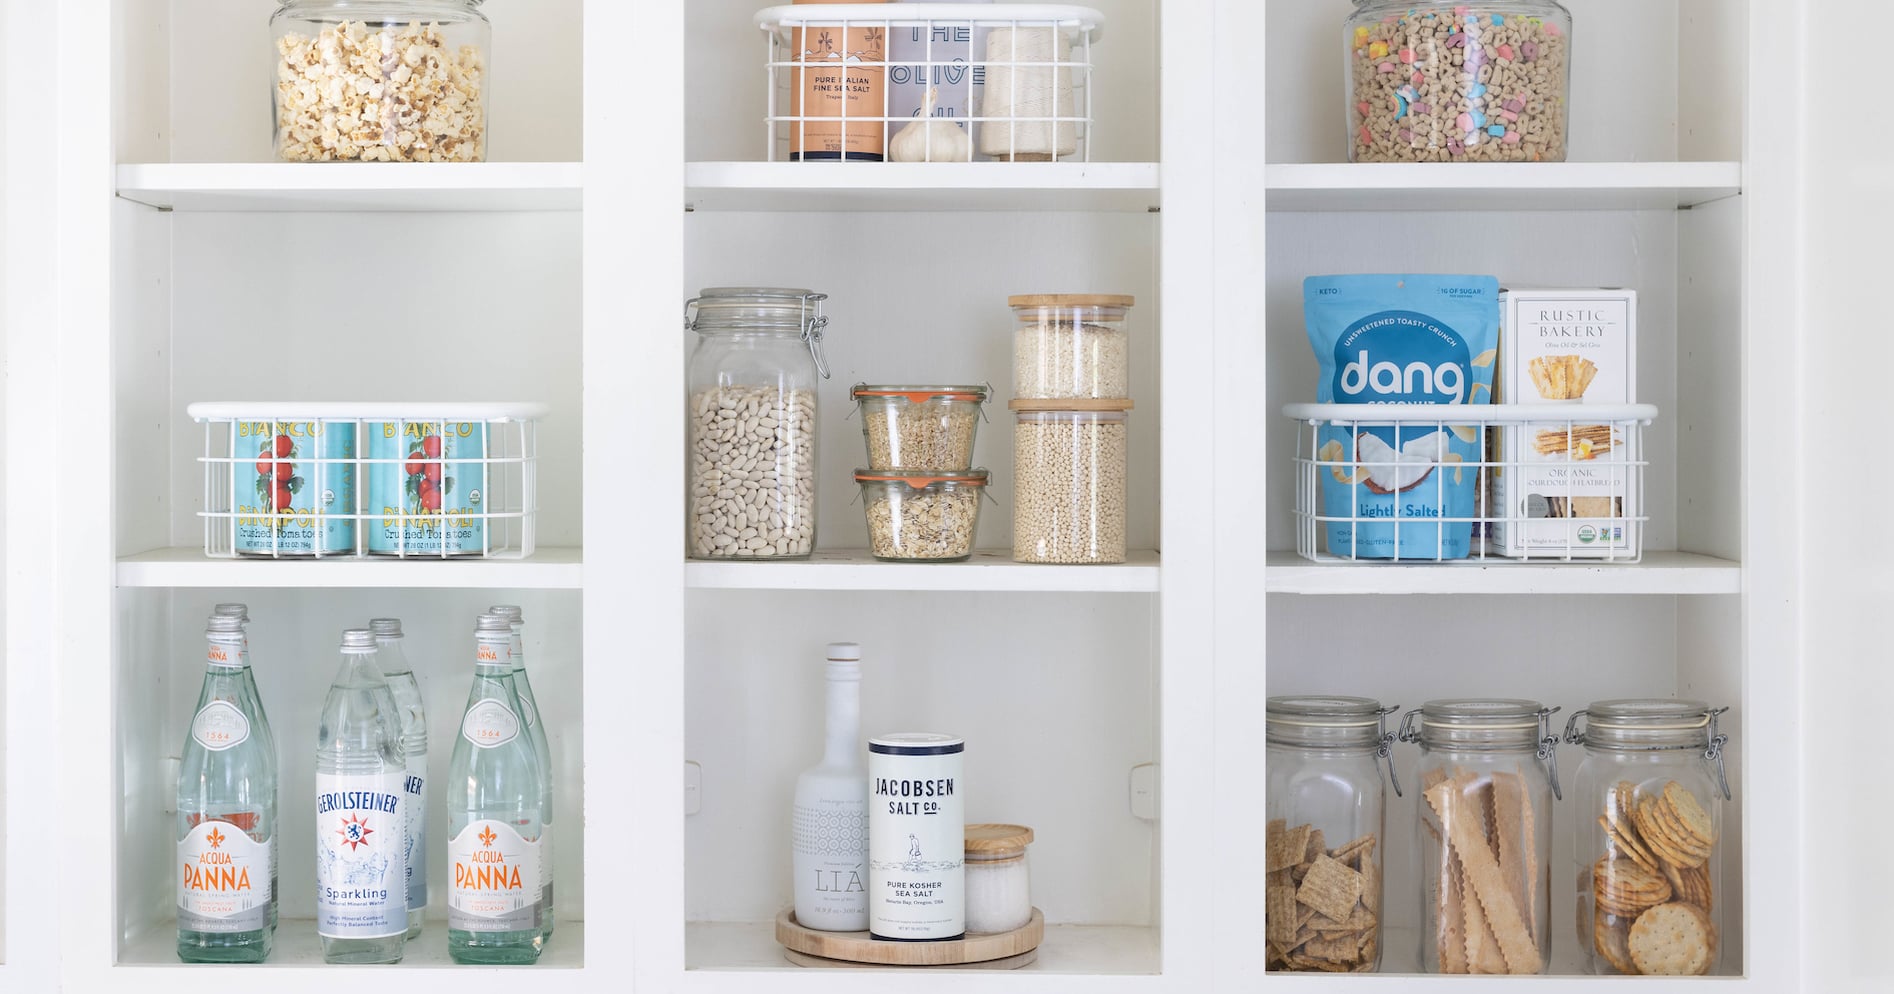 Pantry Decanting Tips, According to a Home Organizing Expert